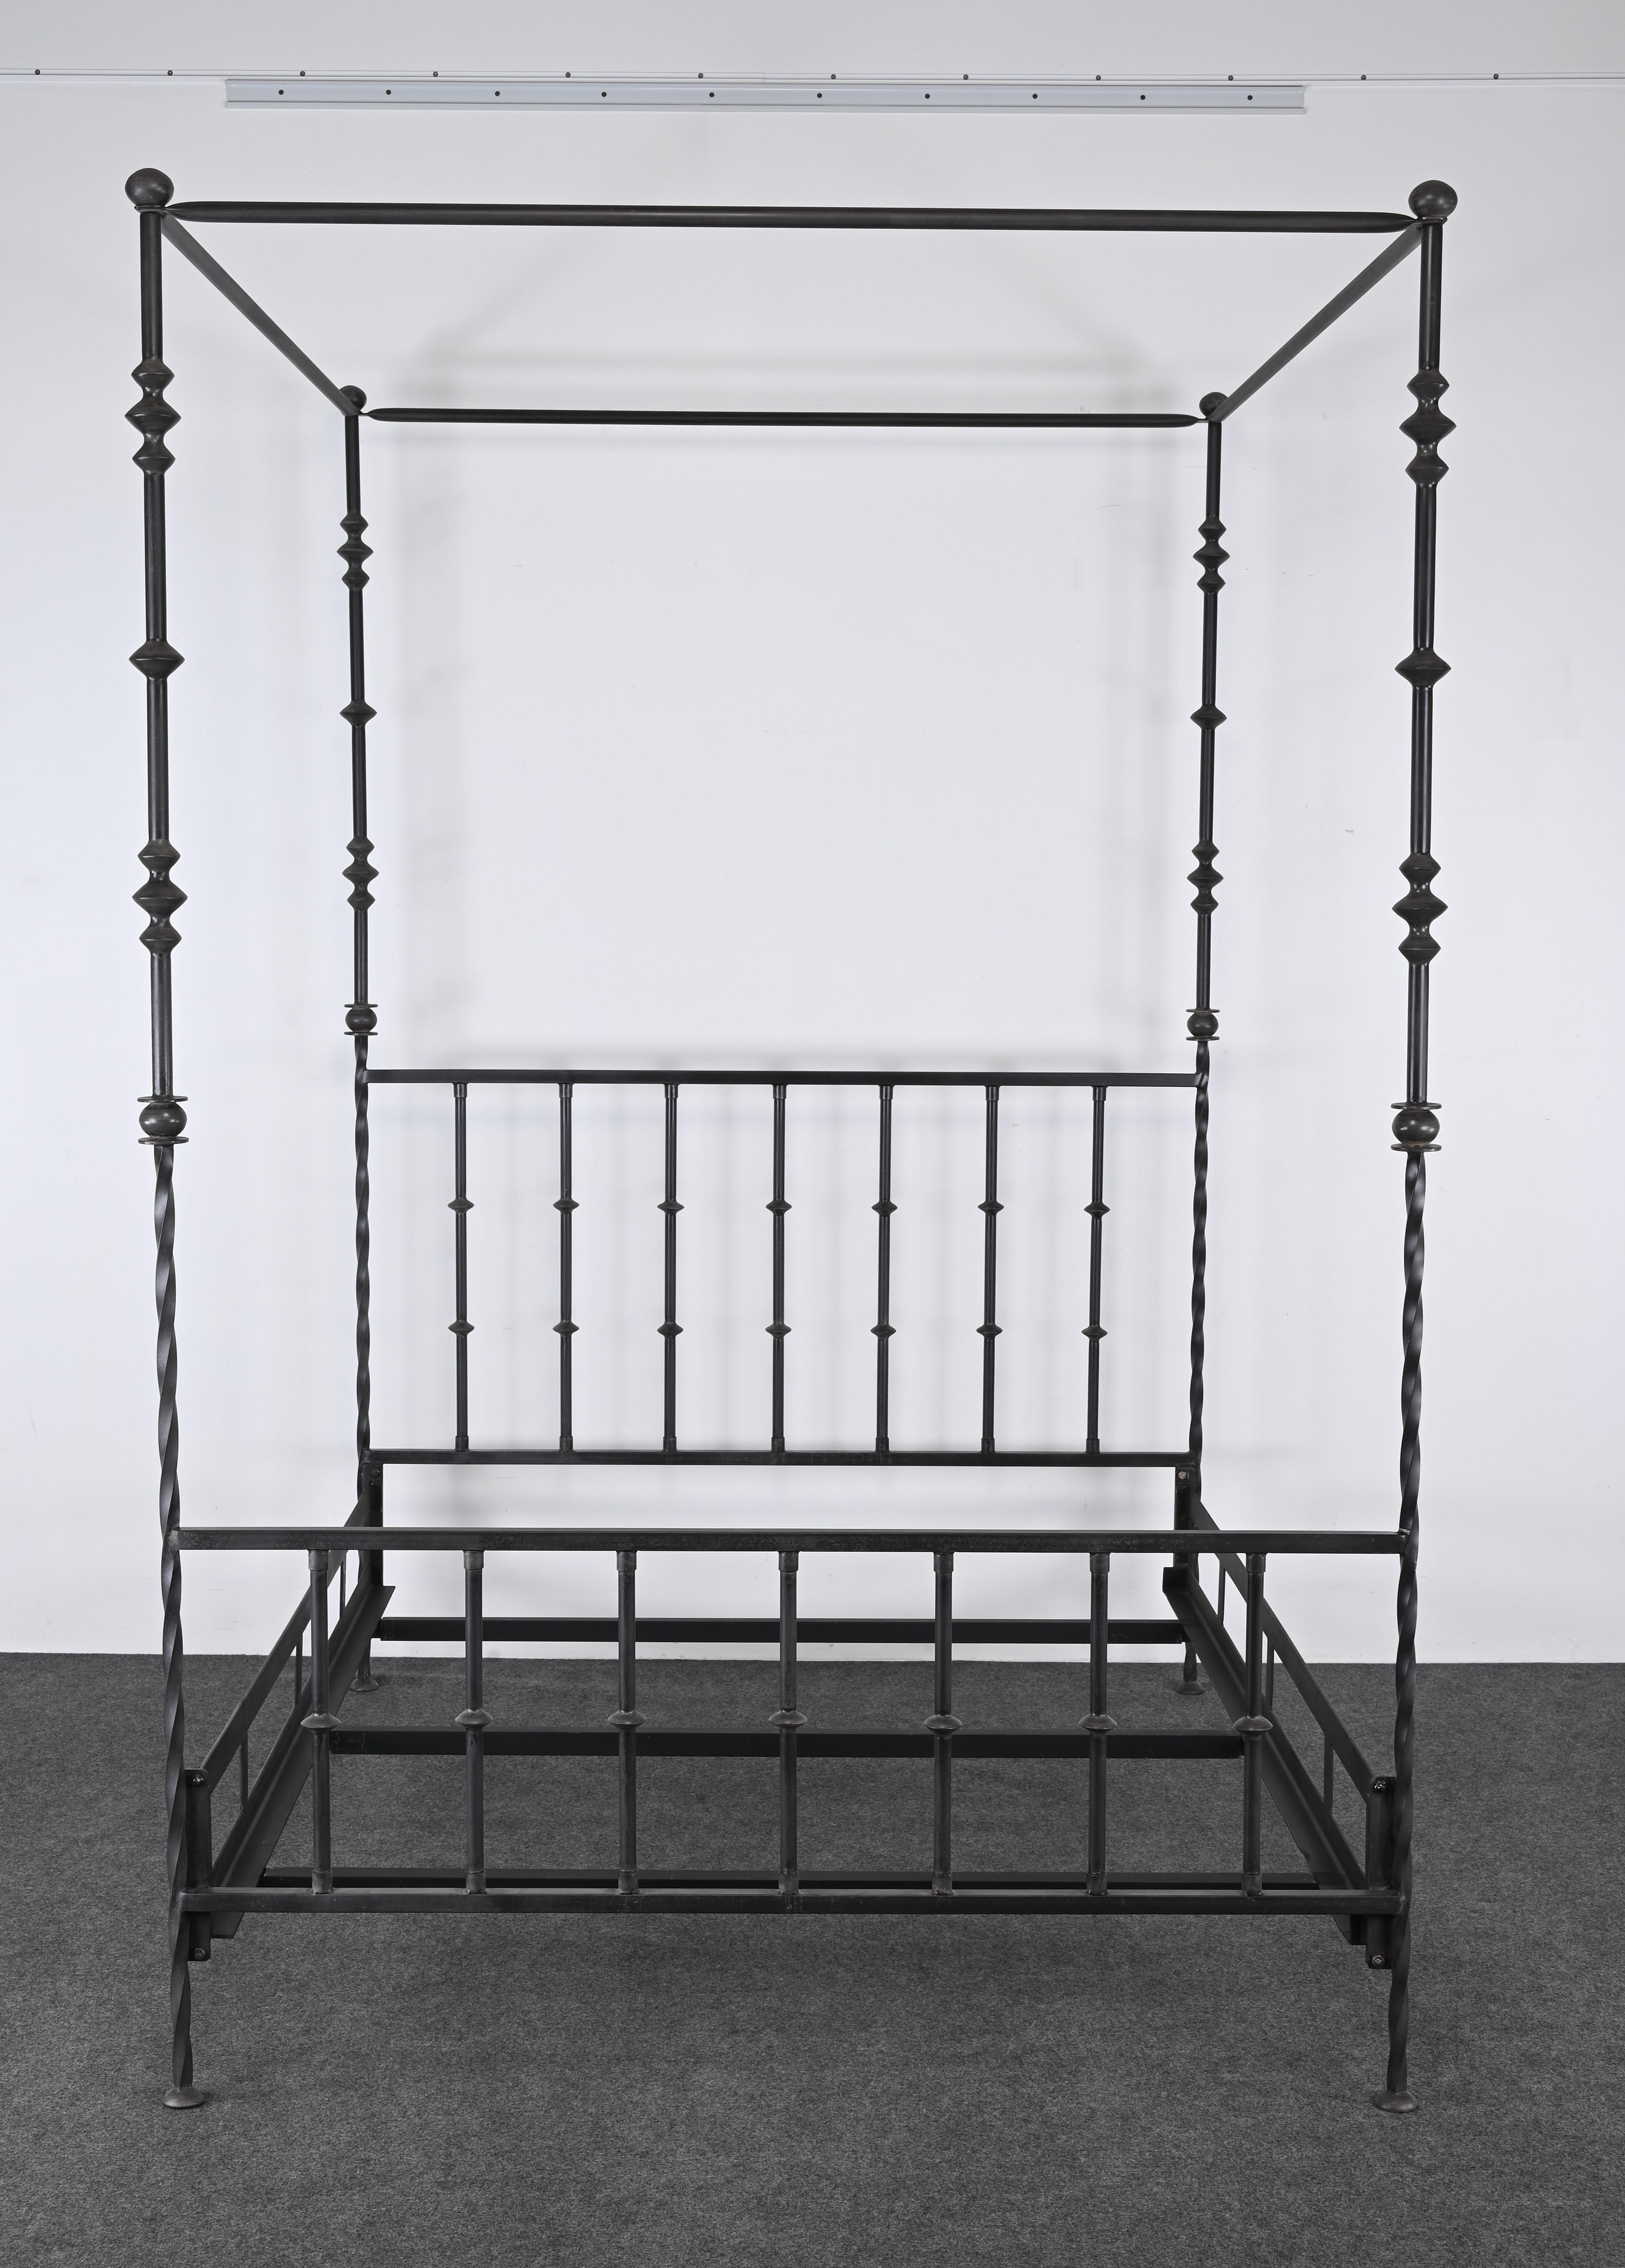 A unique Giacometti-style Poster Bed by Kreiss is titled the Provence Grande Bed. This industrialized patinated iron Bed finish has a luxurious and handsome presence. The Poster Bed would look dramatic or simple depending on how you style this